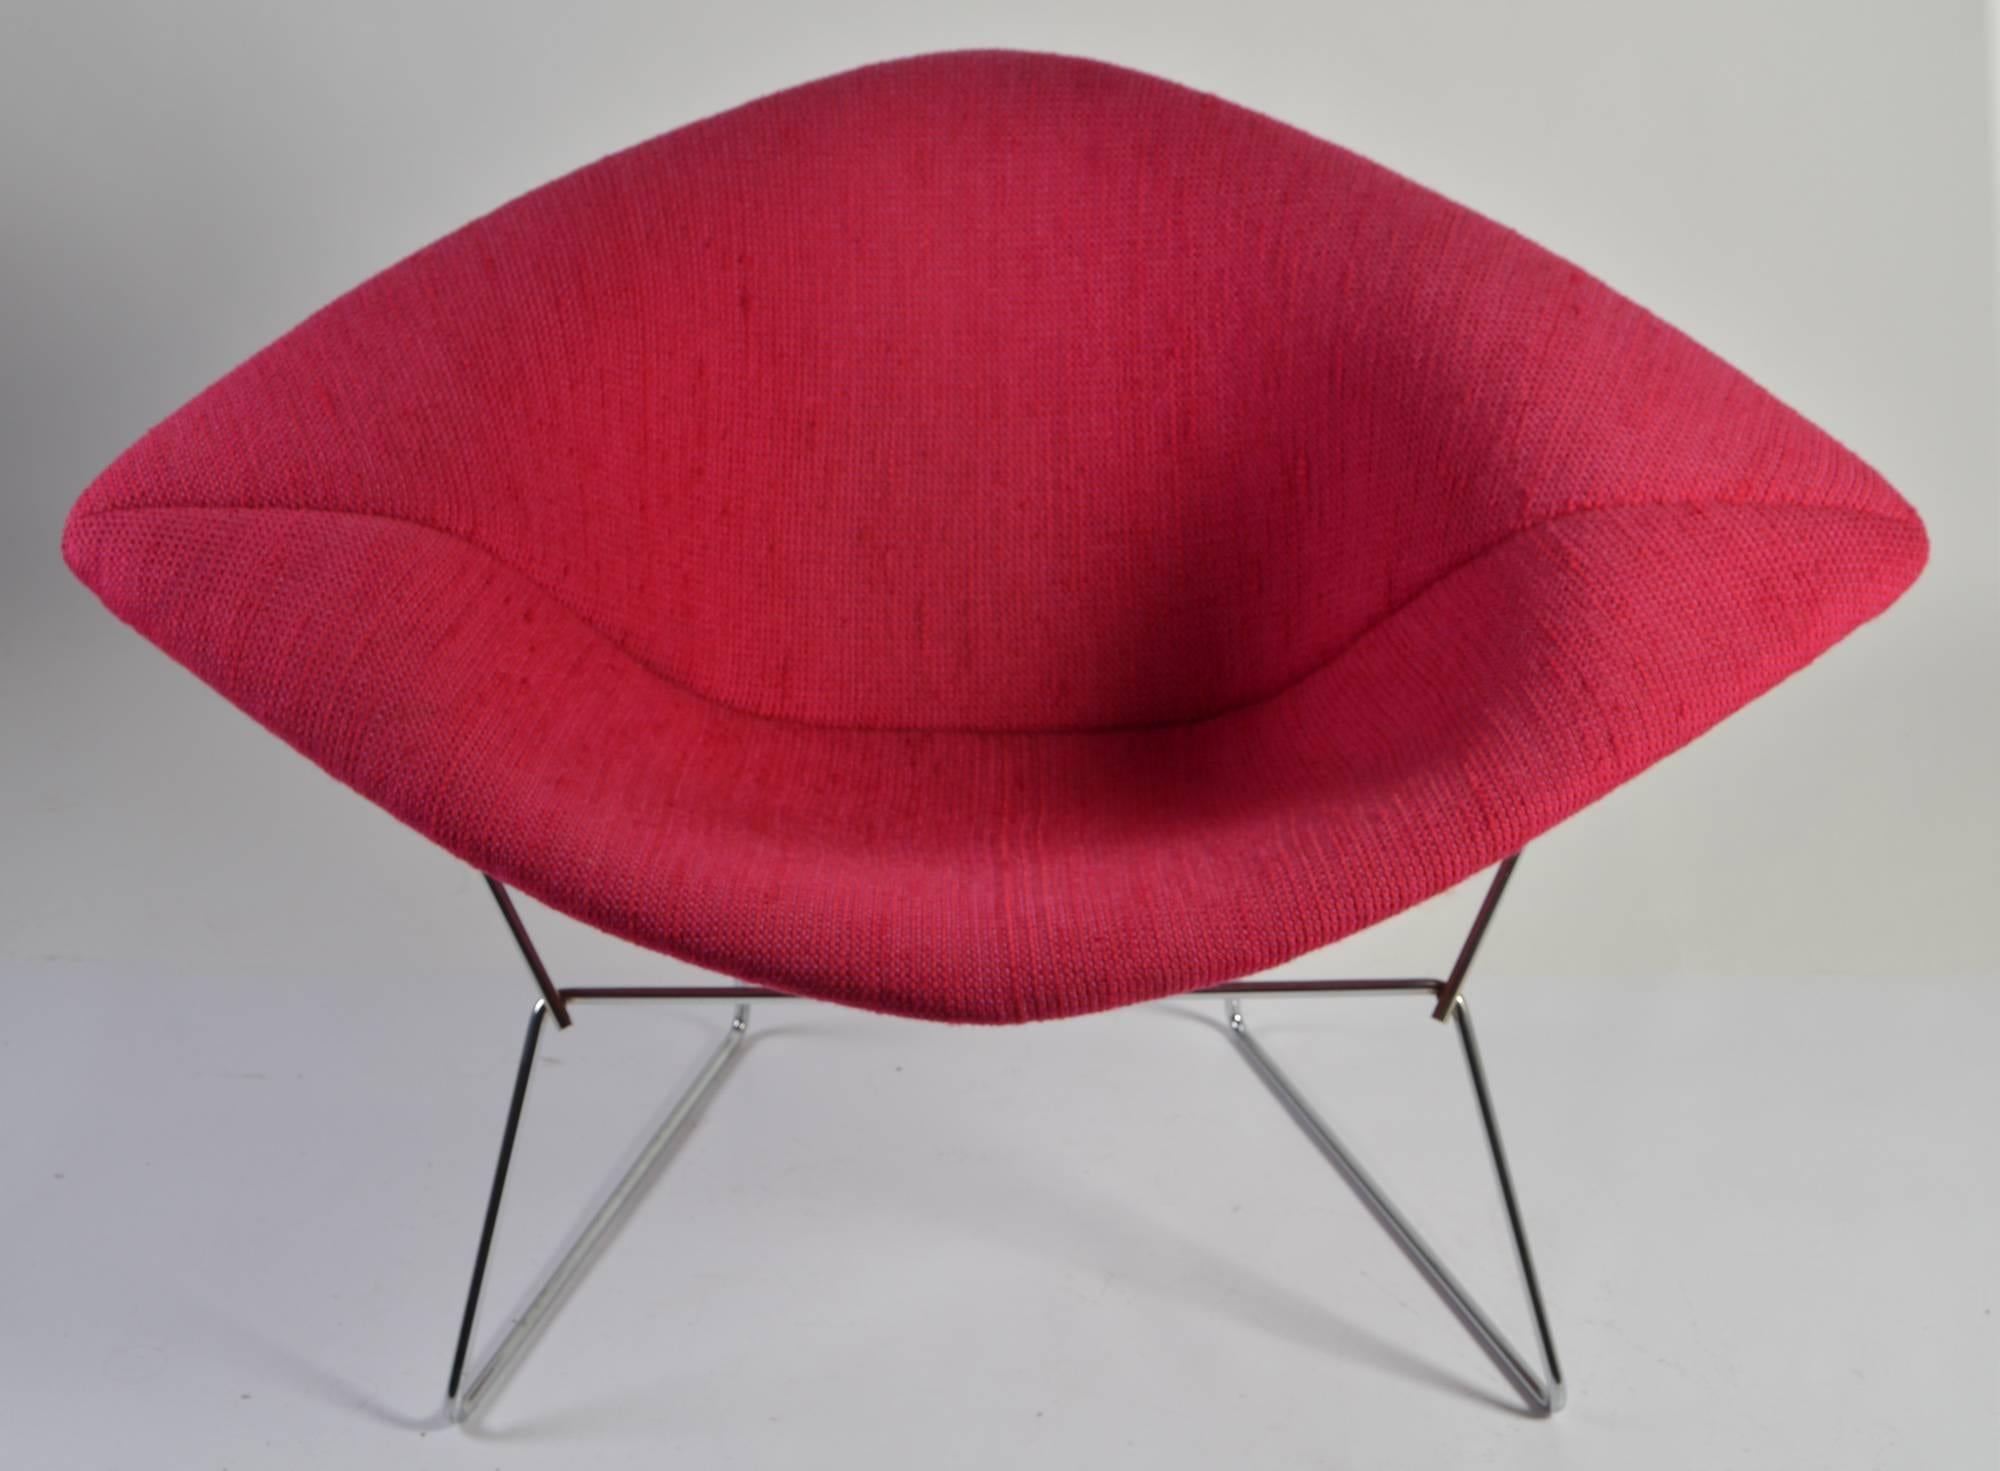 Vintage large Diamond Chair designed by Harry Bertoia for Knoll in 1952. The chair has its original full fabric cover. The color is a magenta red. The chromed steel is in excellent condition. An iconic chair in perfect condition.